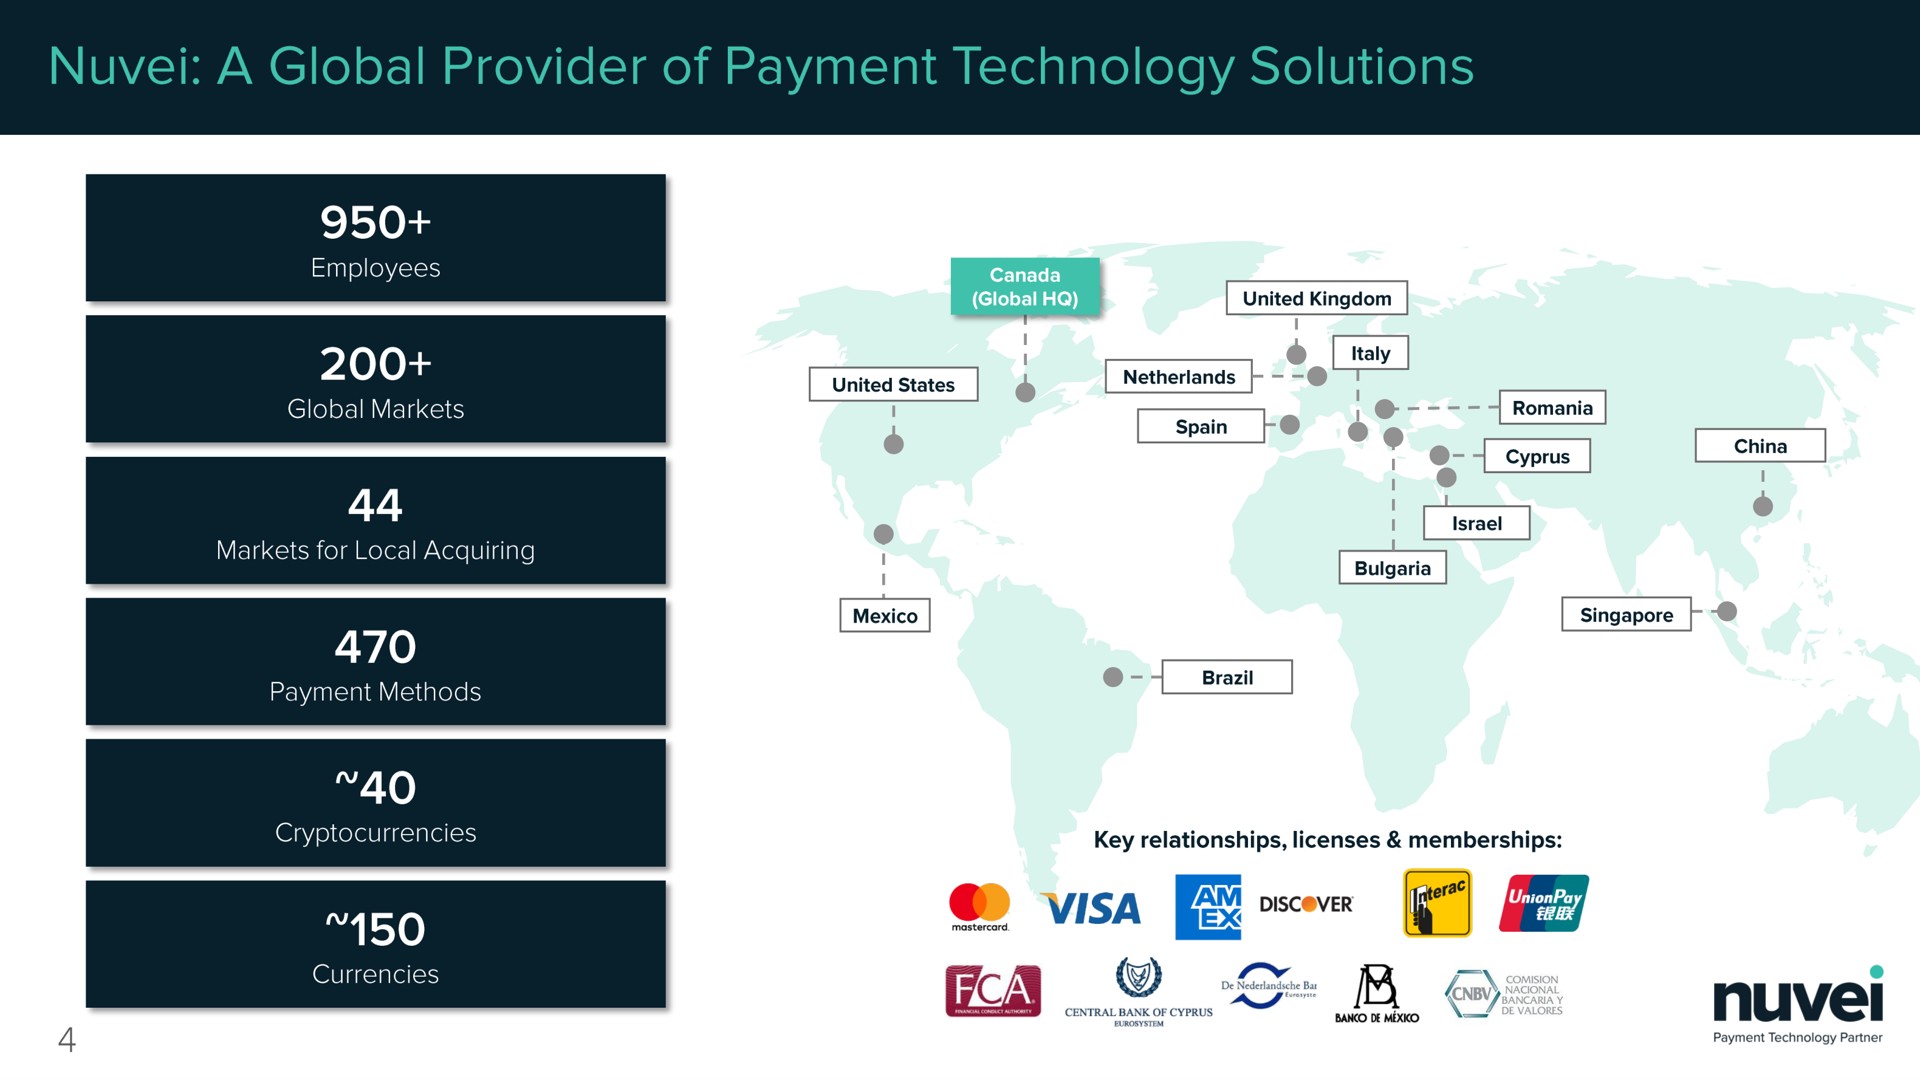 a global provider of payment technology solutions visa cee on | Nuvei